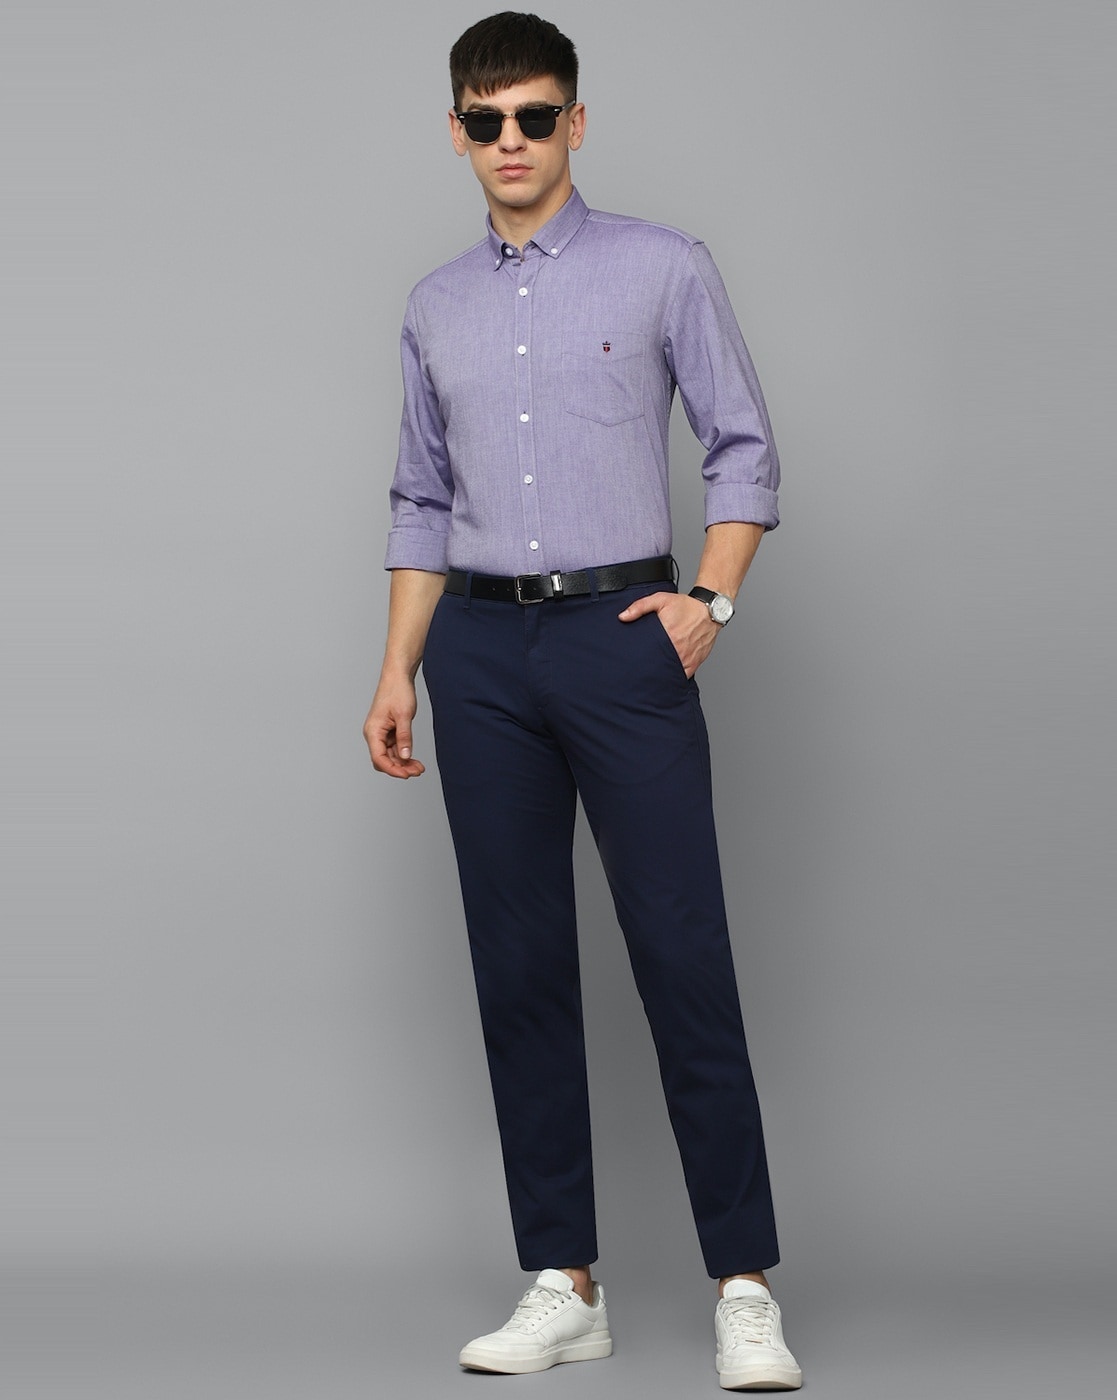 What tie color should be worn with grey pants and a blue shirt? - Quora